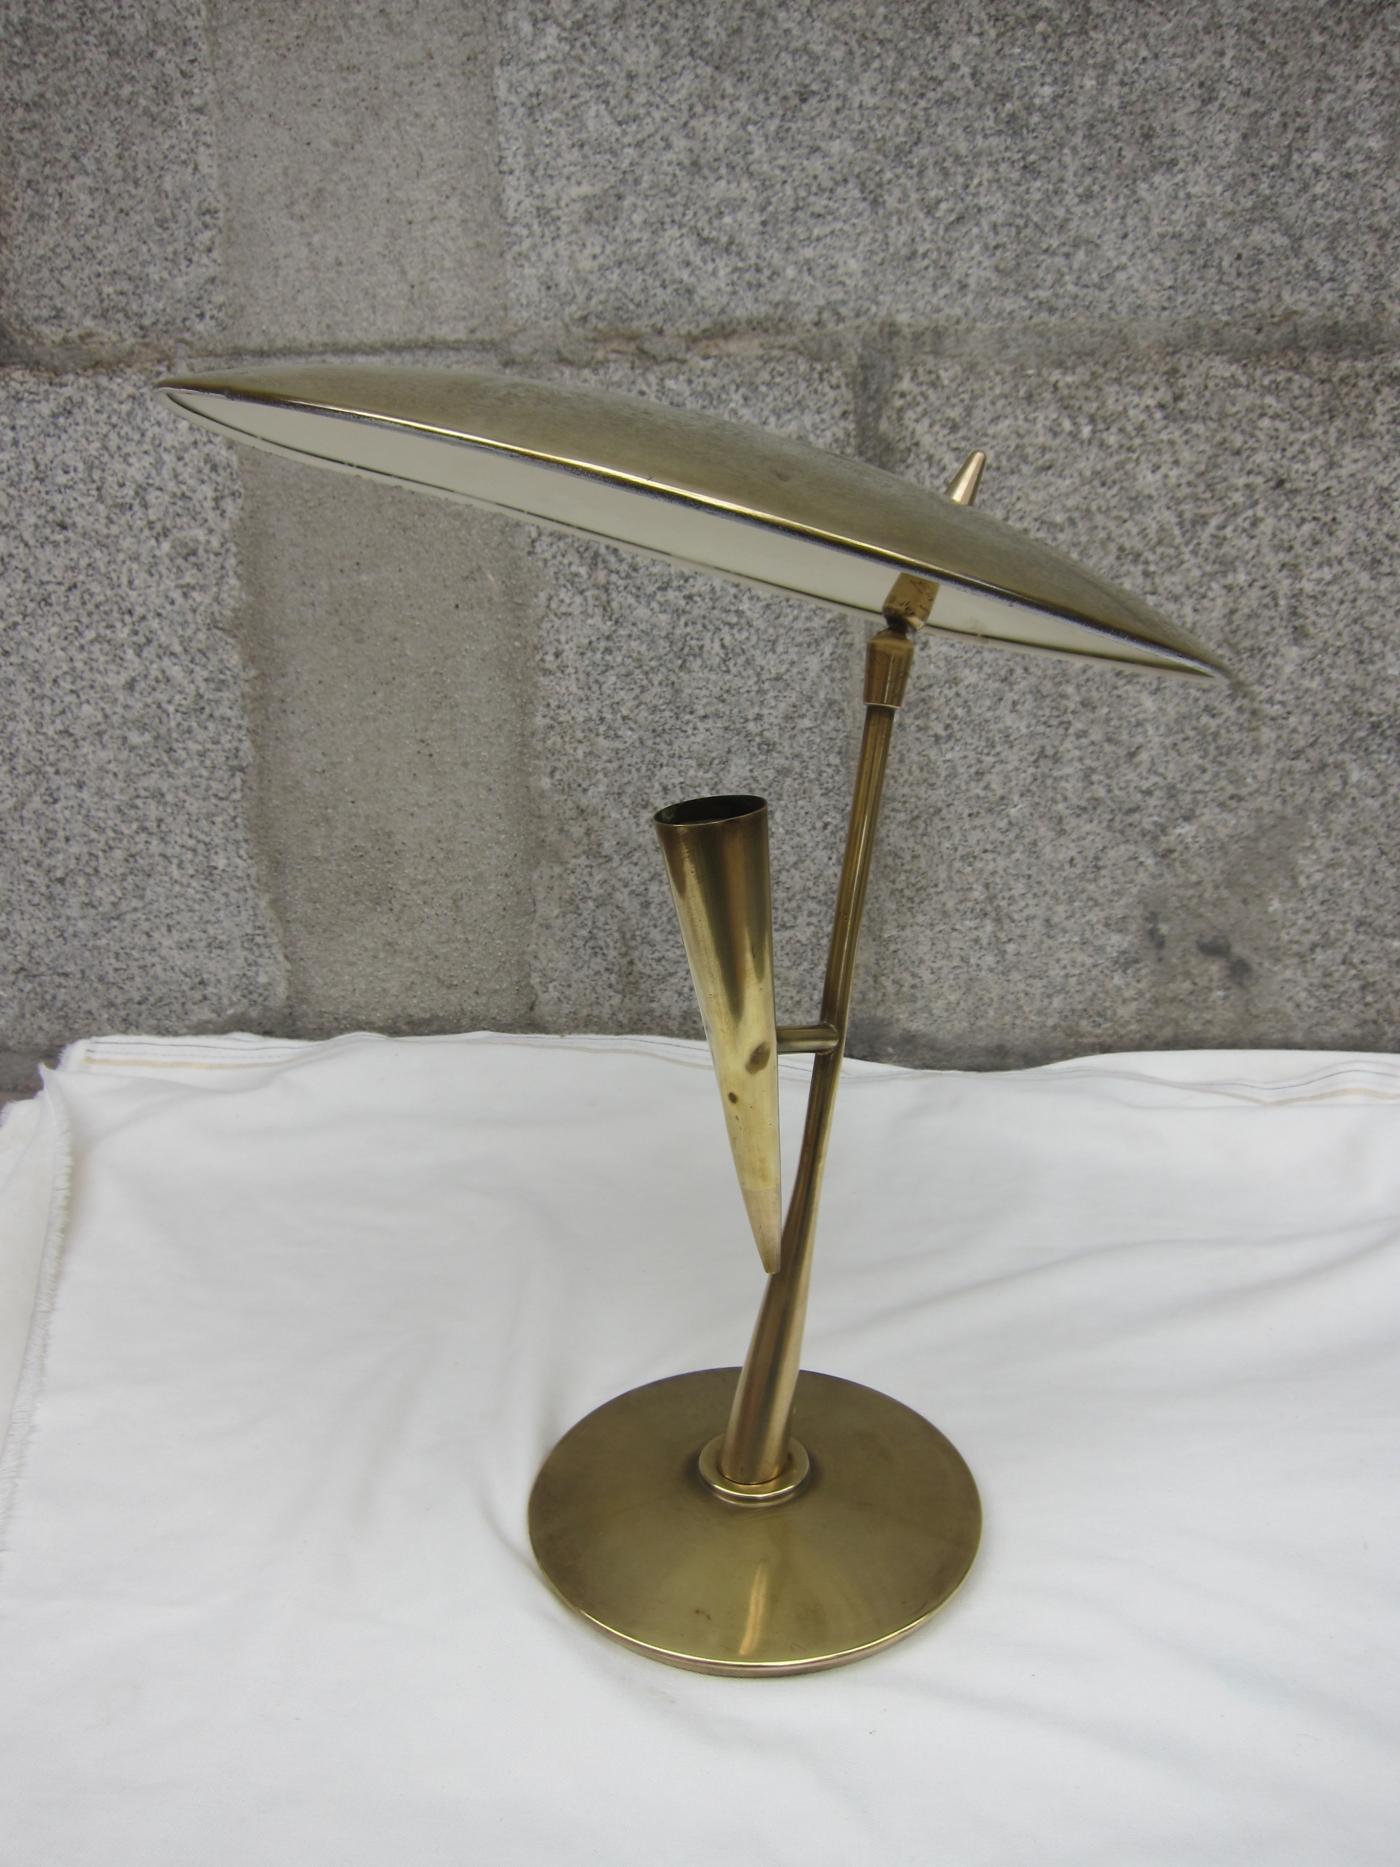 Bruno chiarini, brass and white lacquered metal midcentury table lamp, Italy 1950.